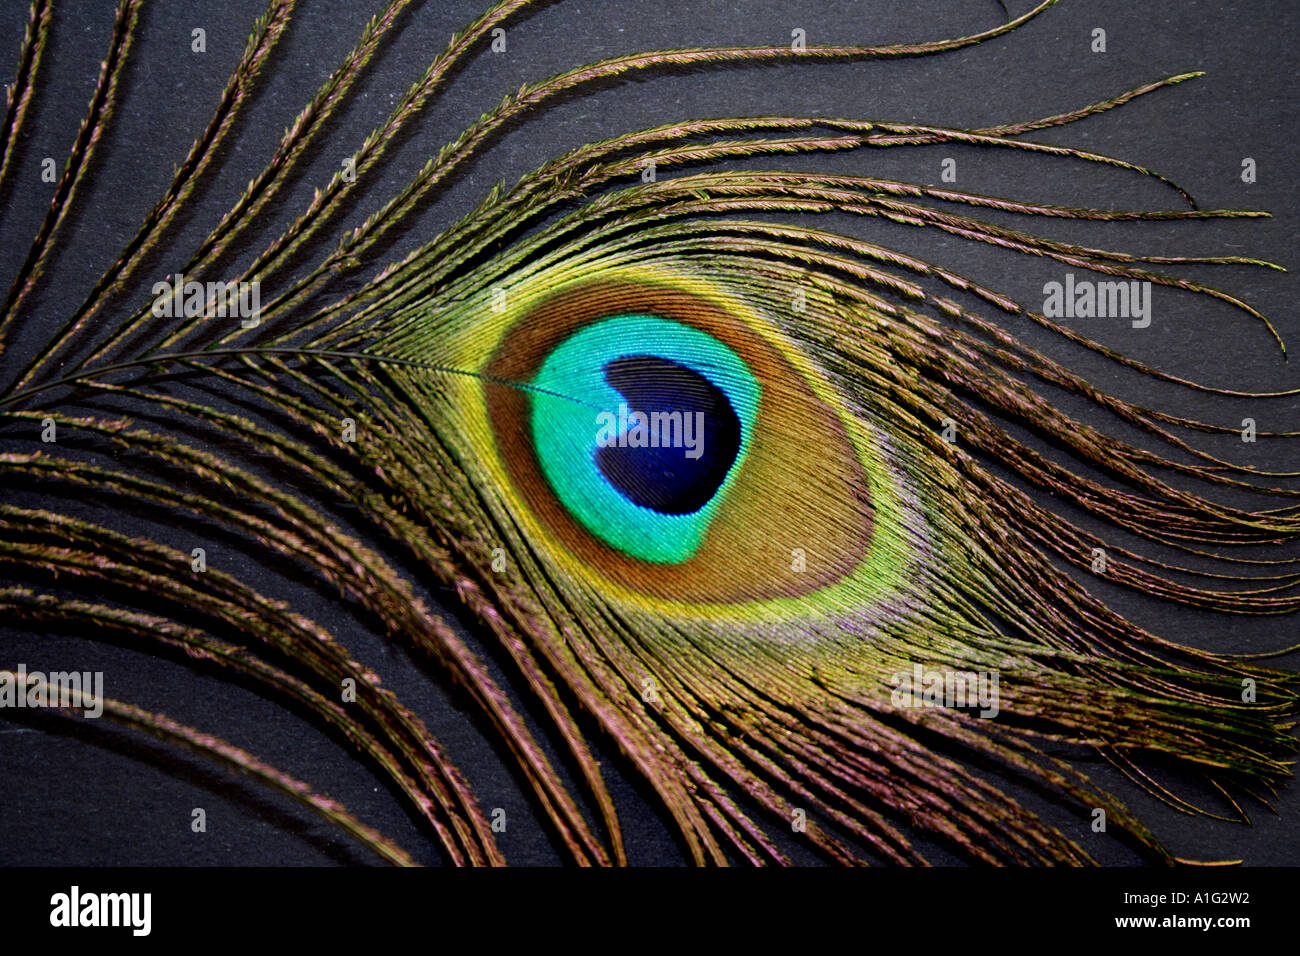 CLOSE UP OF THE EYE OF A PEACOCK FEATHER BLACK BACKGROUND Stock Photo -  Alamy